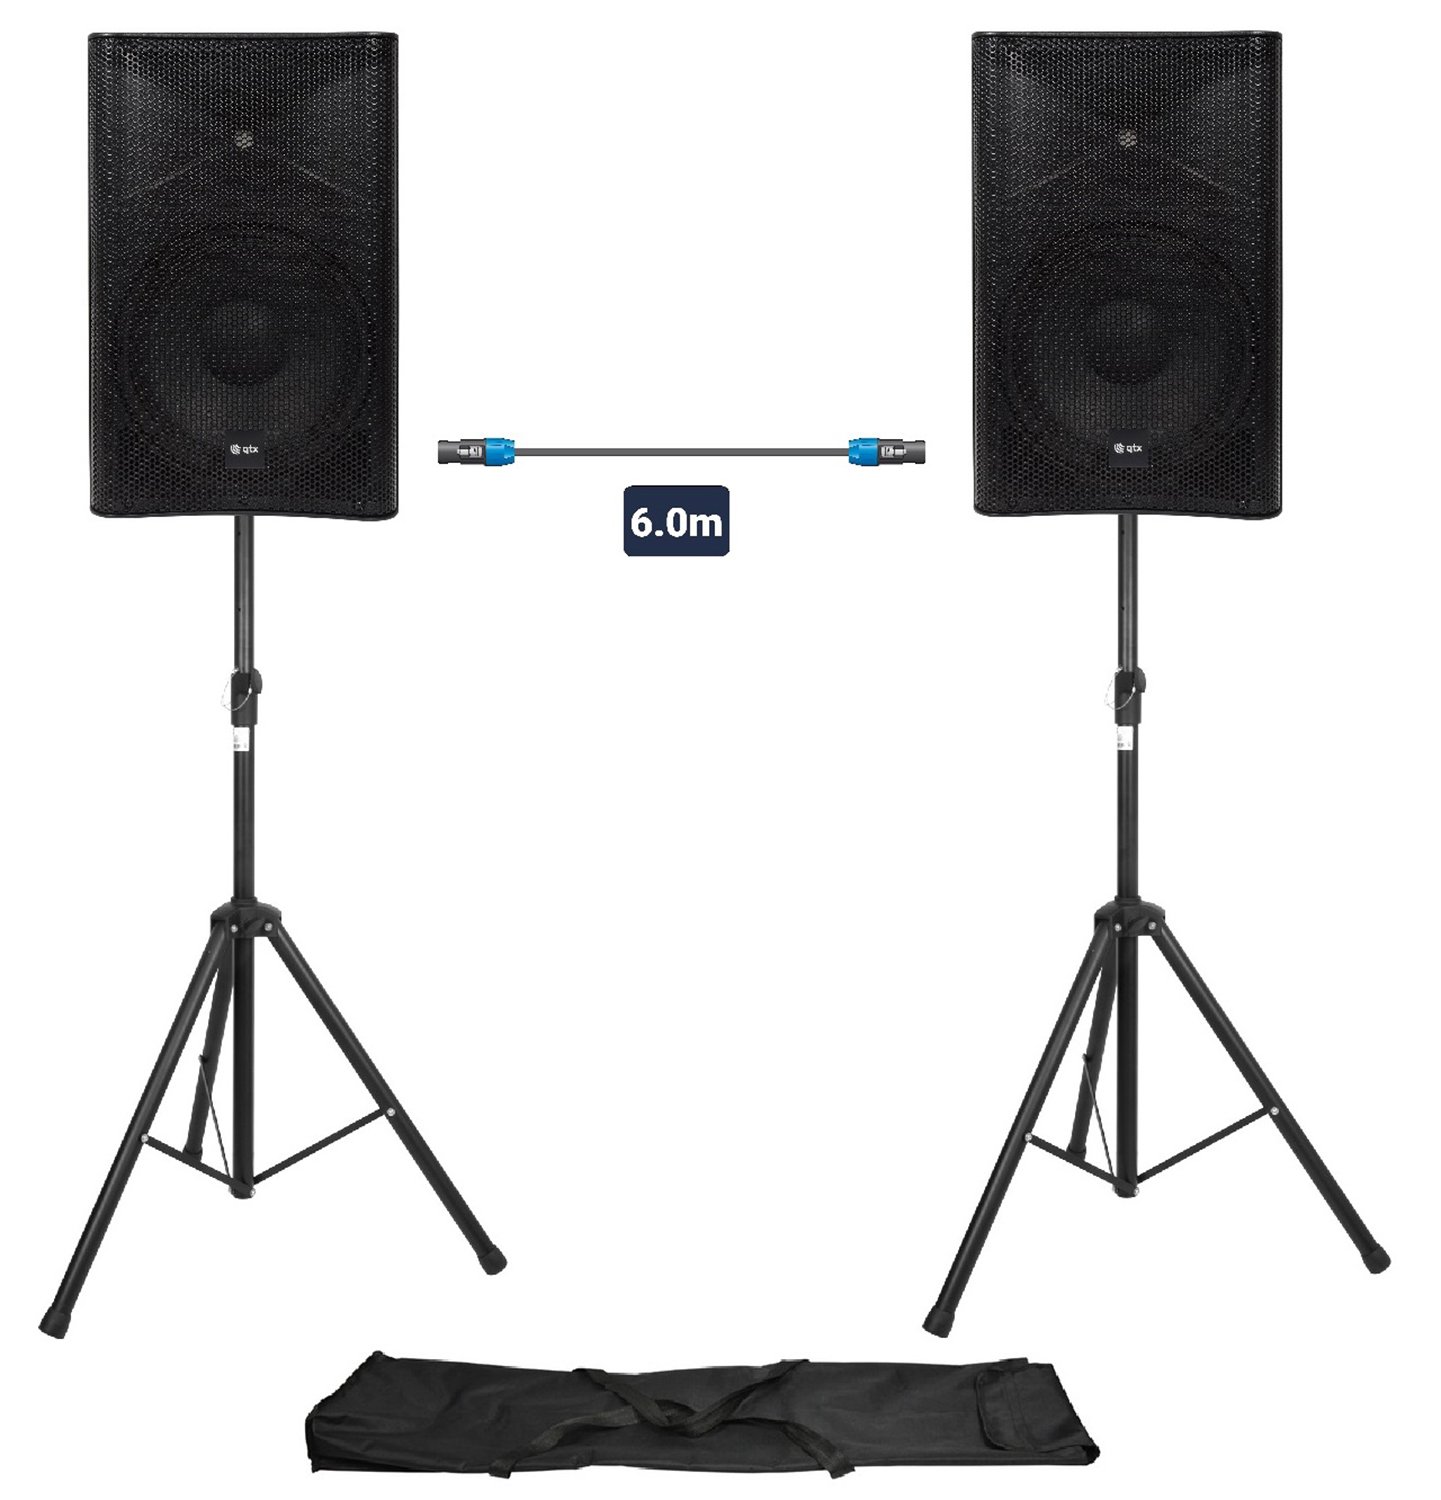 QUEST PA Setup With Stands QUEST-12 Two Speaker PA Setup with Stands & Lead